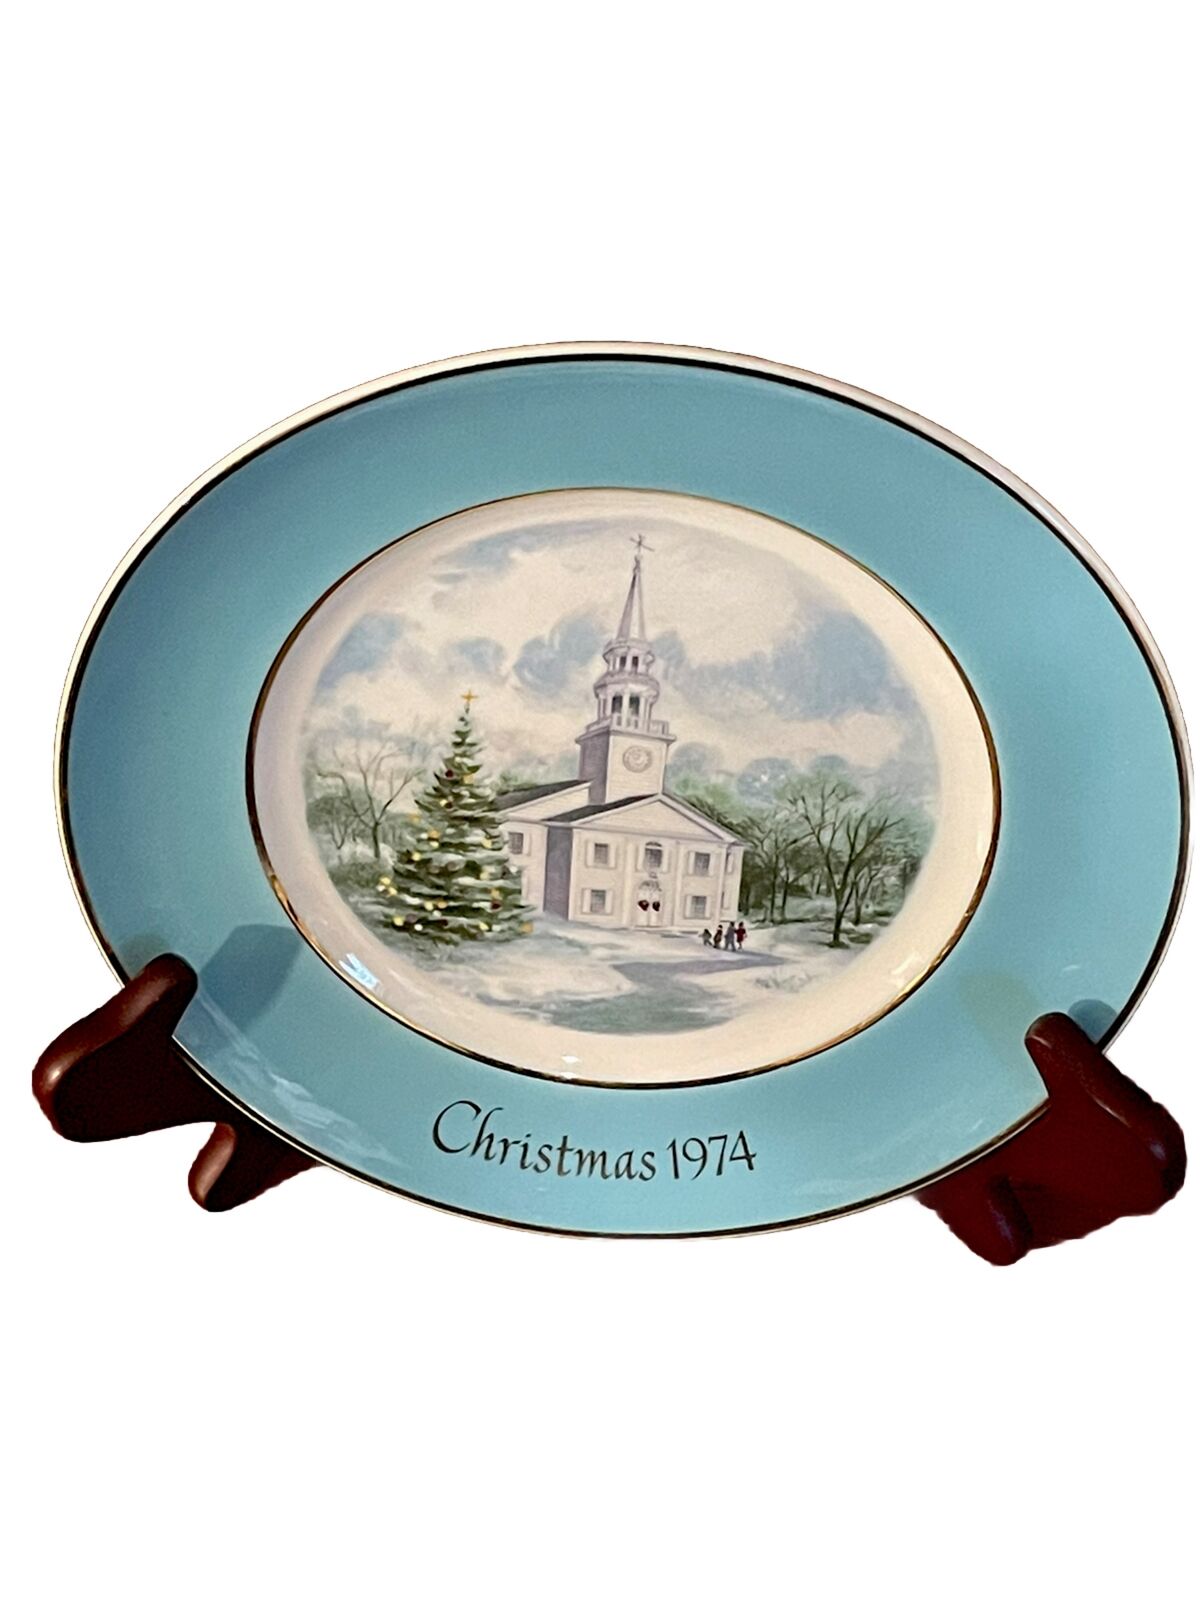 Avon "Country Church" Christmas Plate 1974 Second Edition Vintage Minty